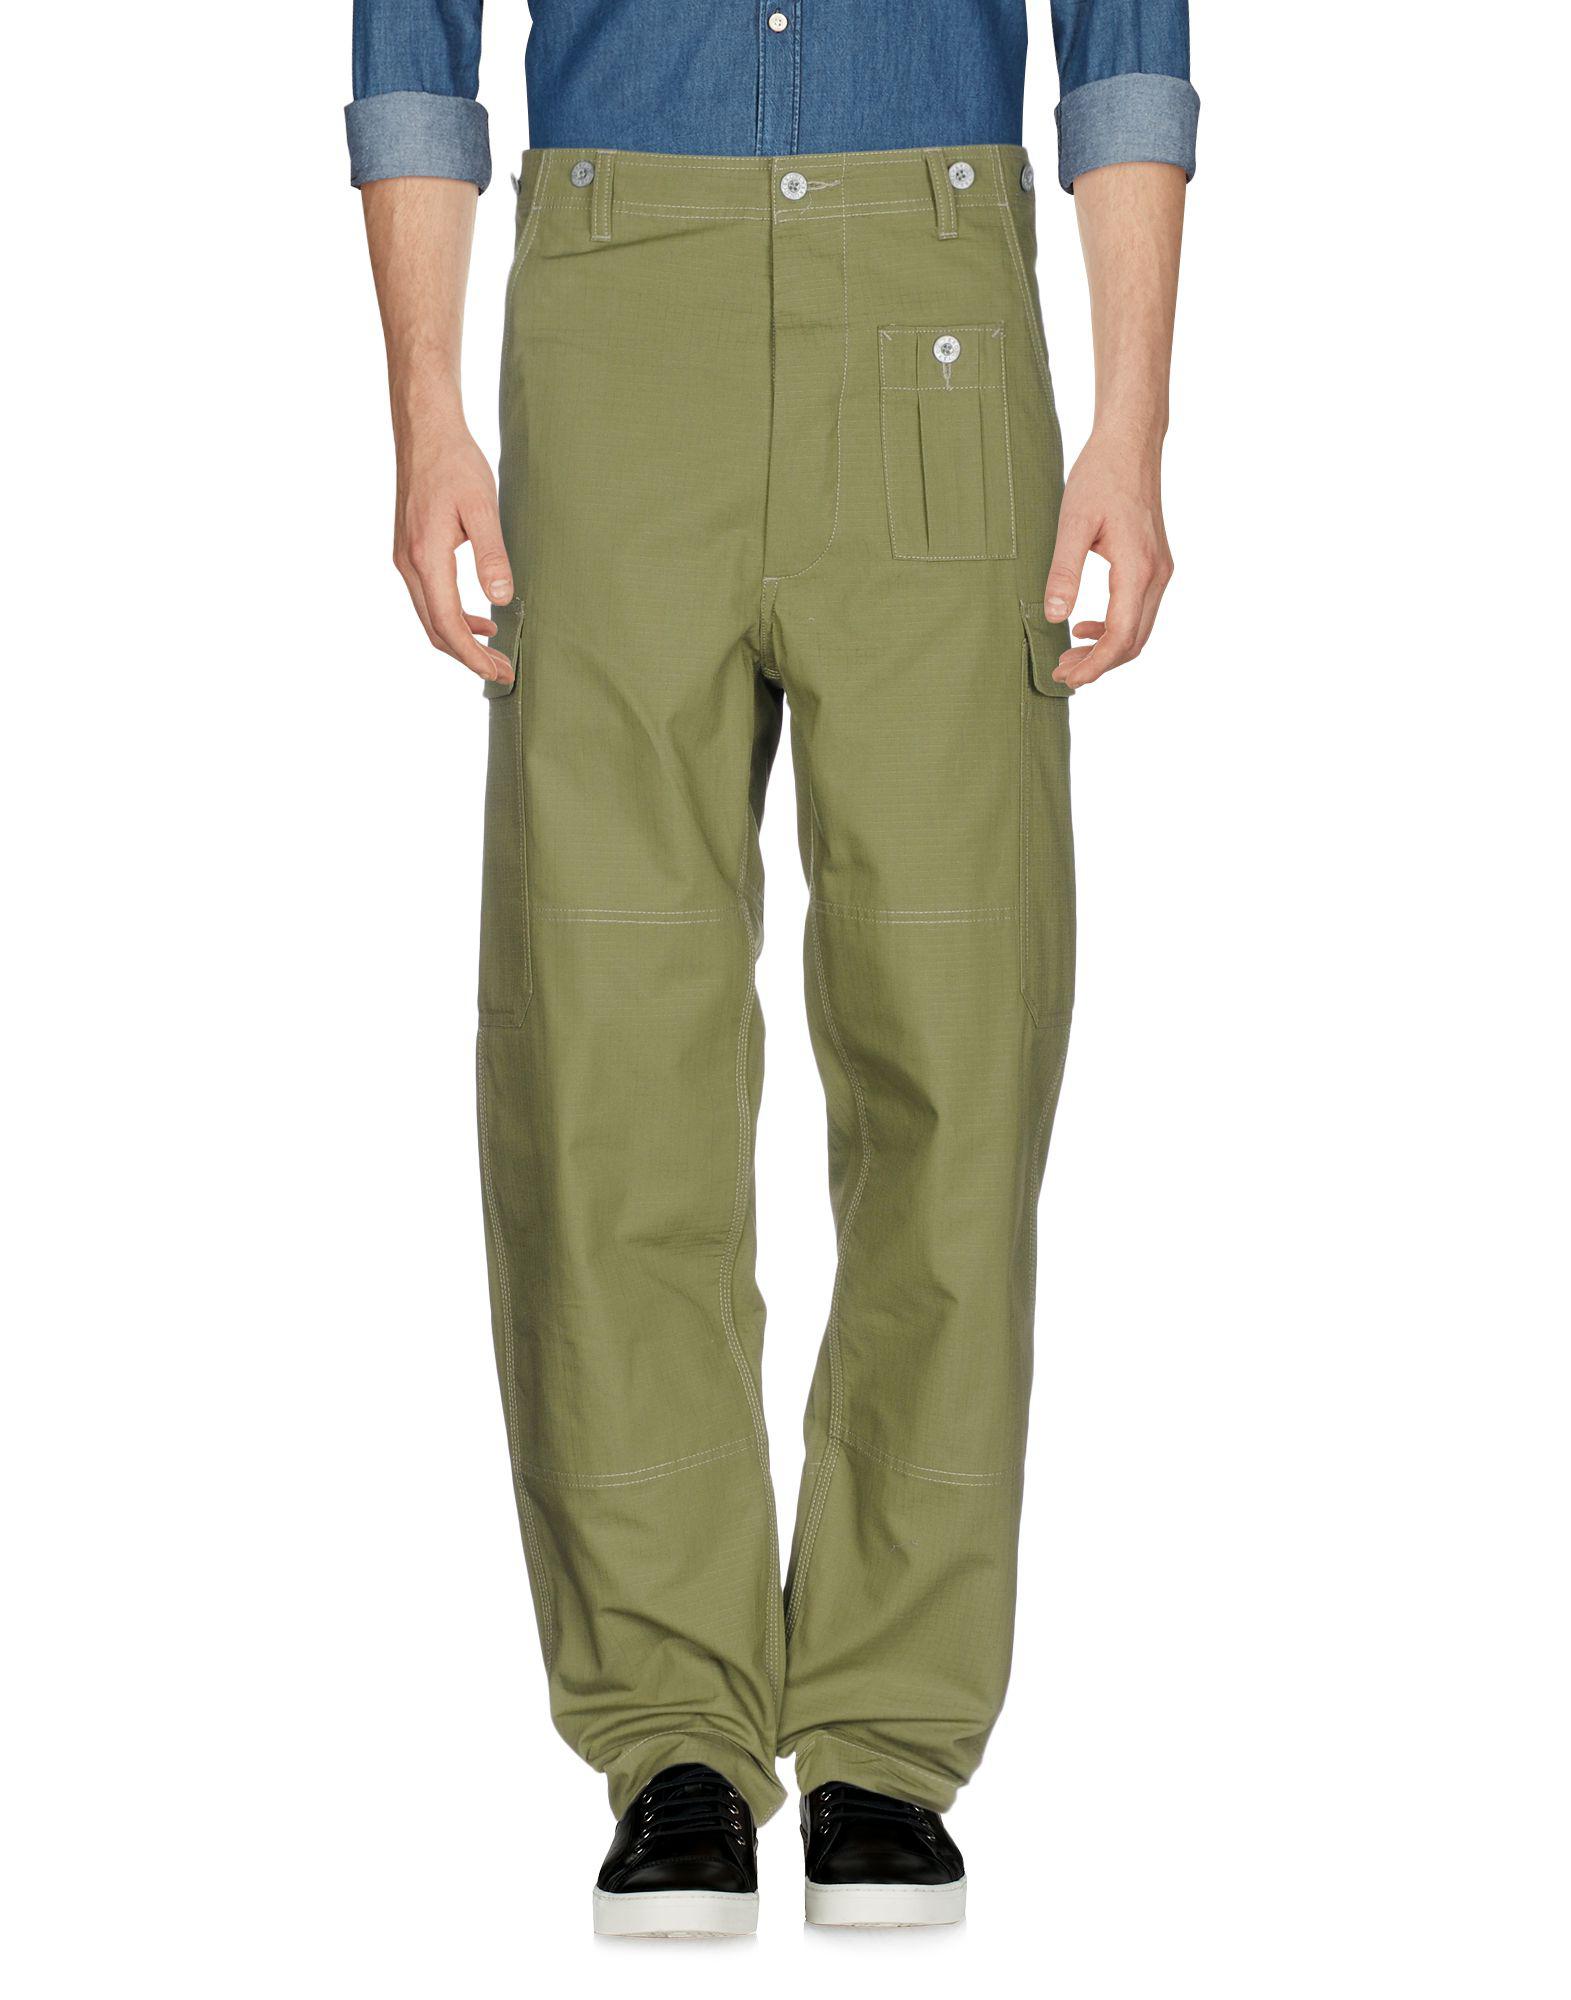 Lyst - Nigel Cabourn Casual Pants in Green for Men